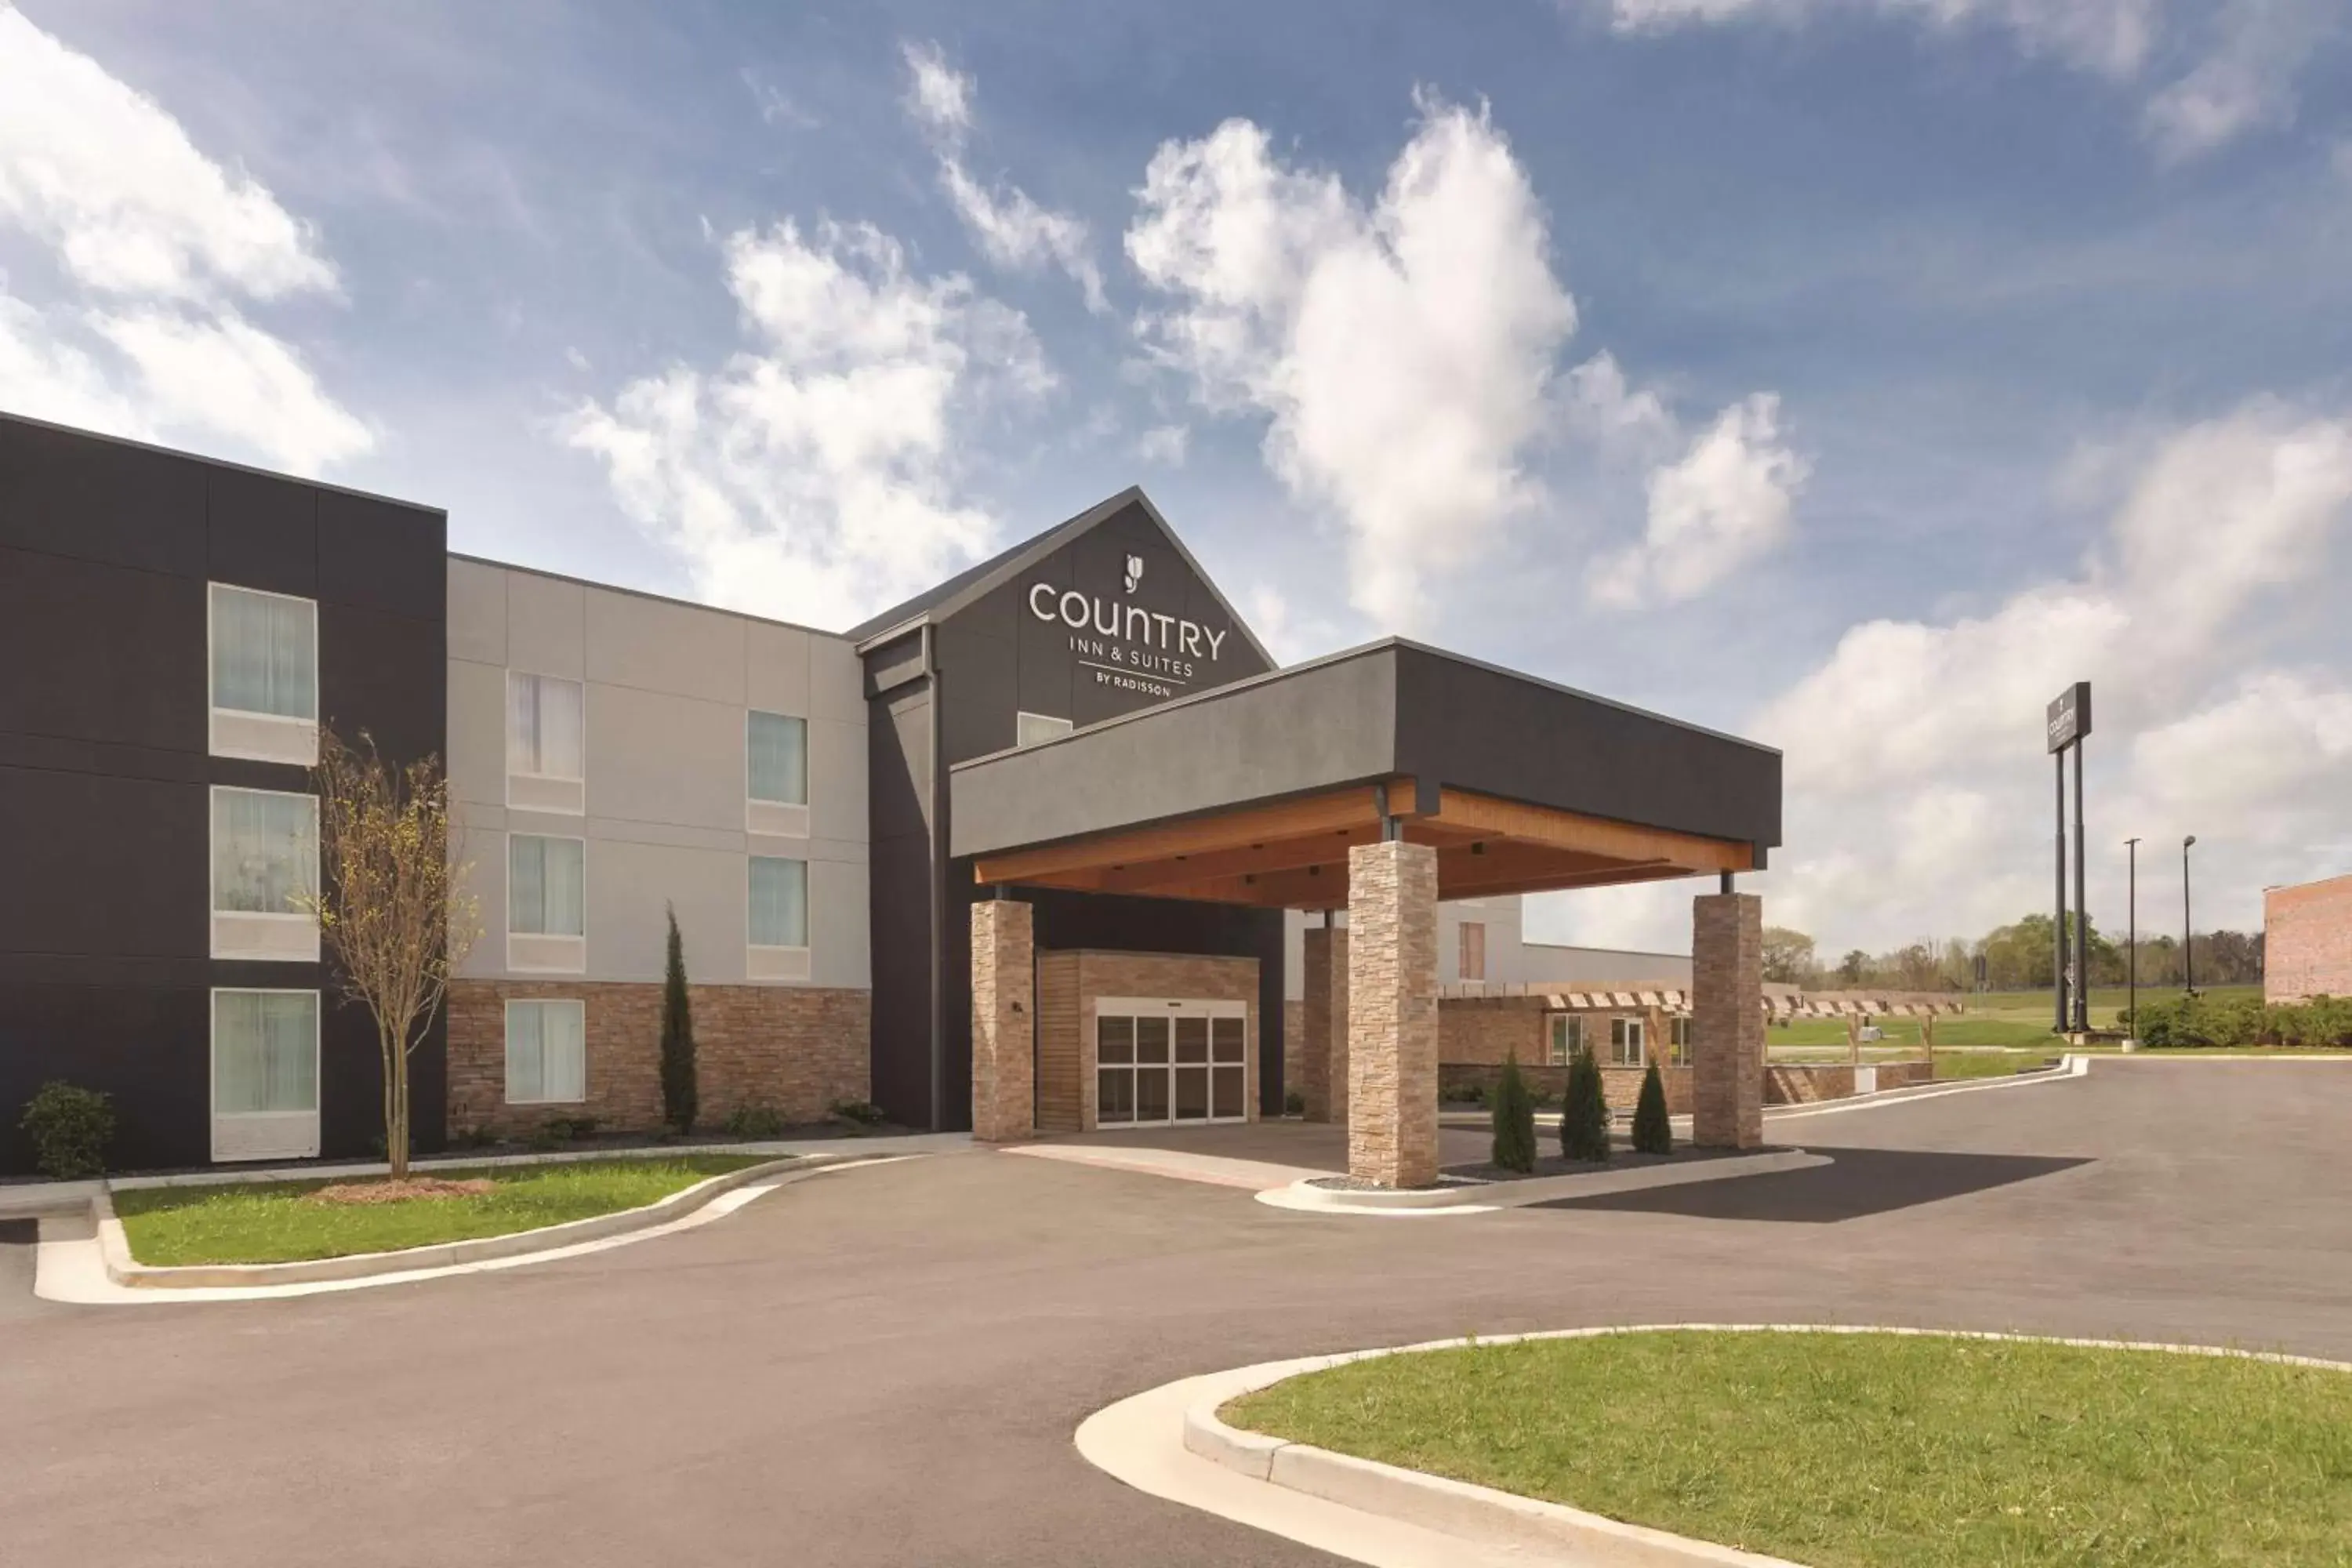 Property building in Country Inn & Suites by Radisson, Macon West, GA